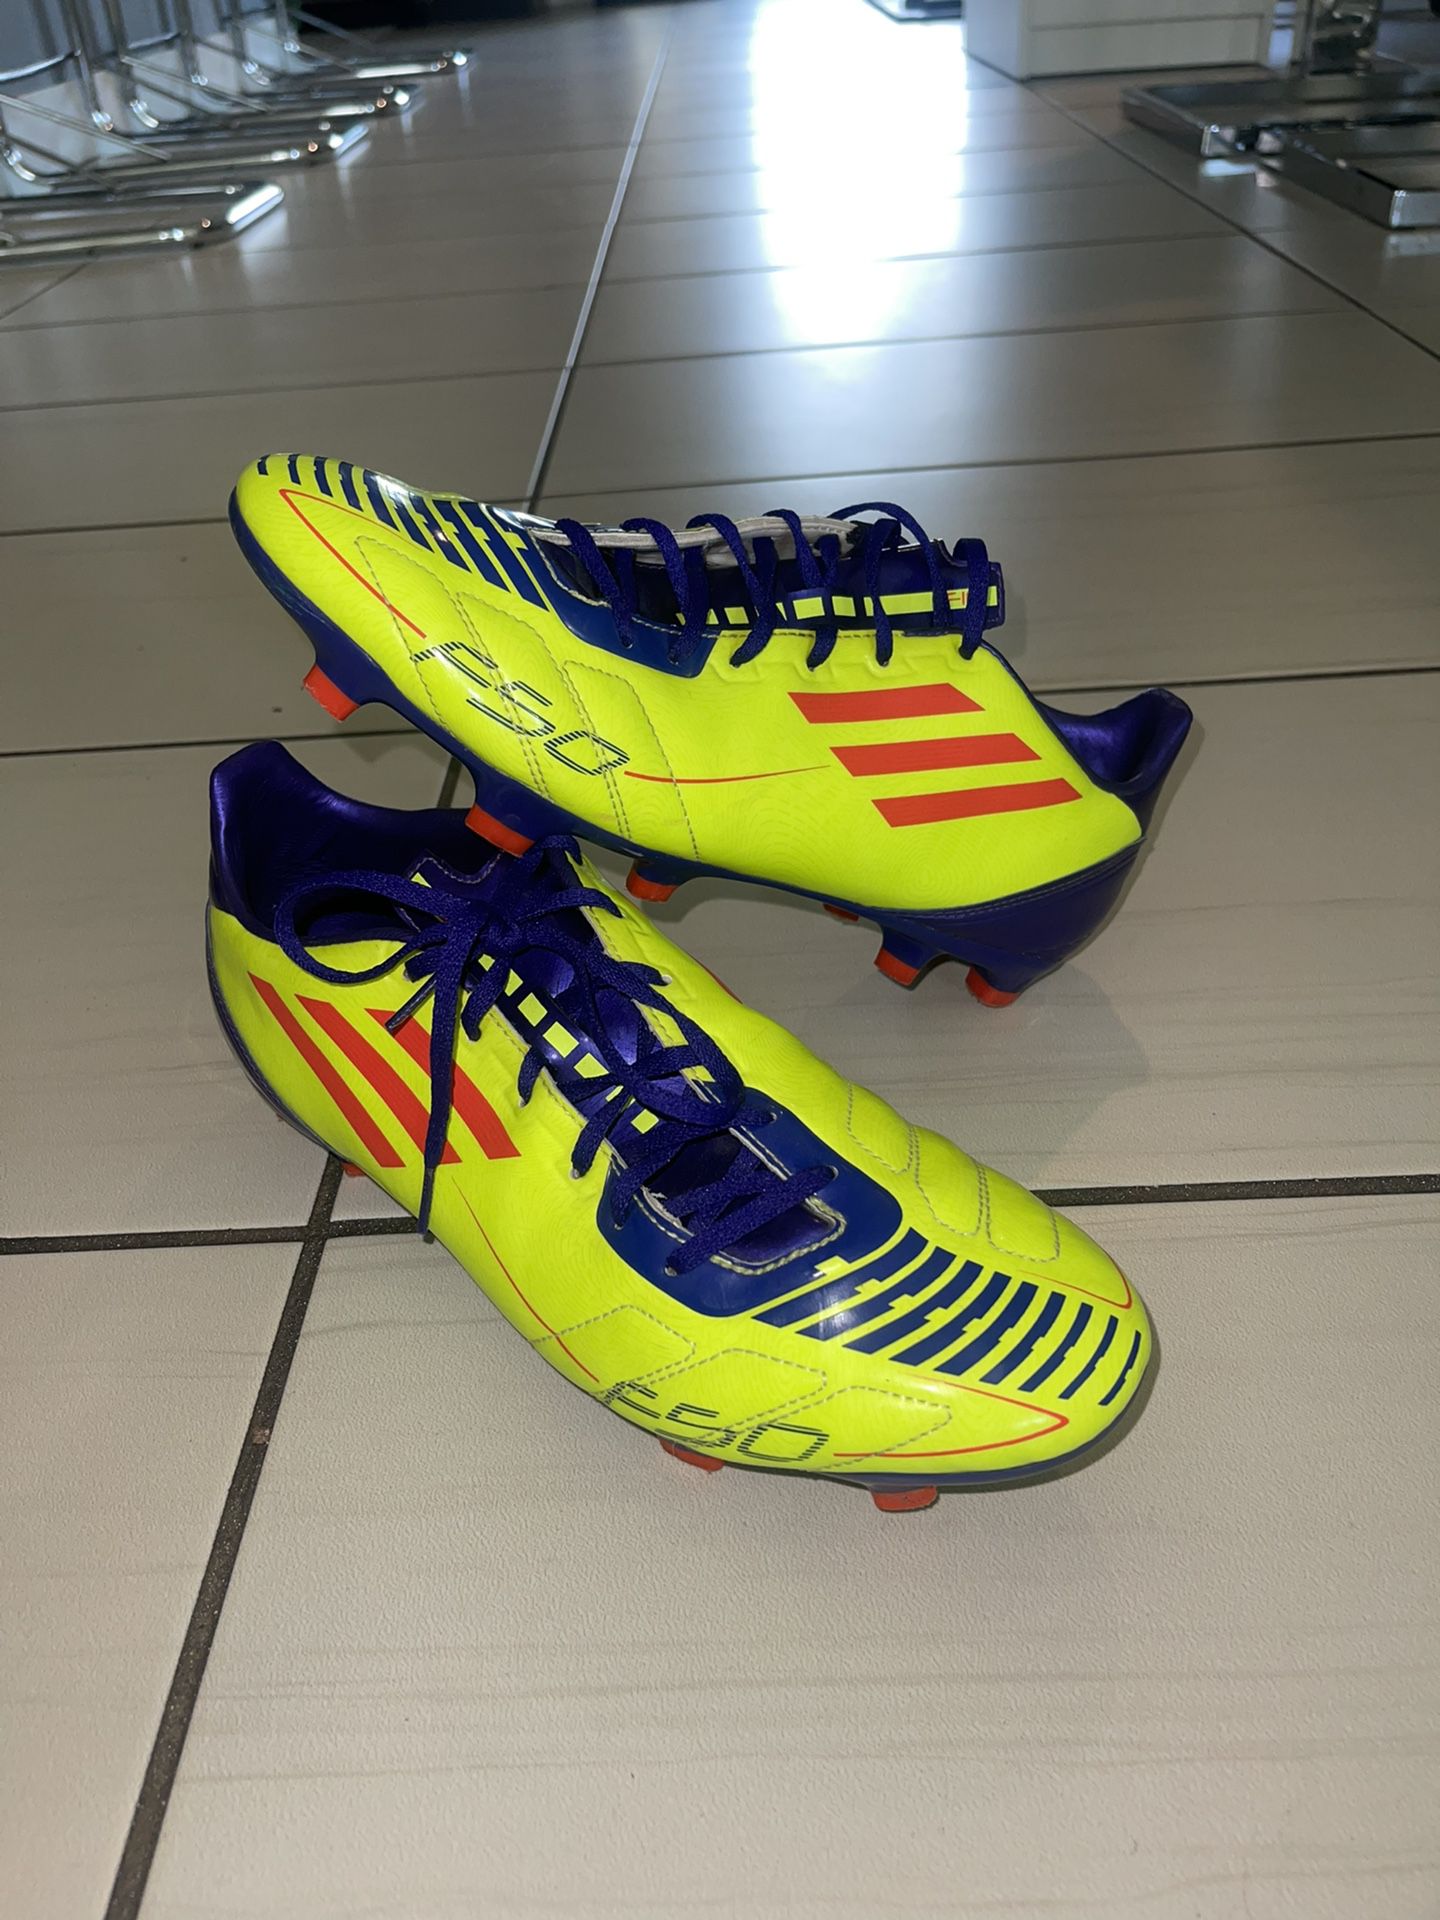 Independencia Ese Turismo Messi Adidas F50 Adizero TRX soccer cleats size 10.5 for Sale in Medley, FL  - OfferUp